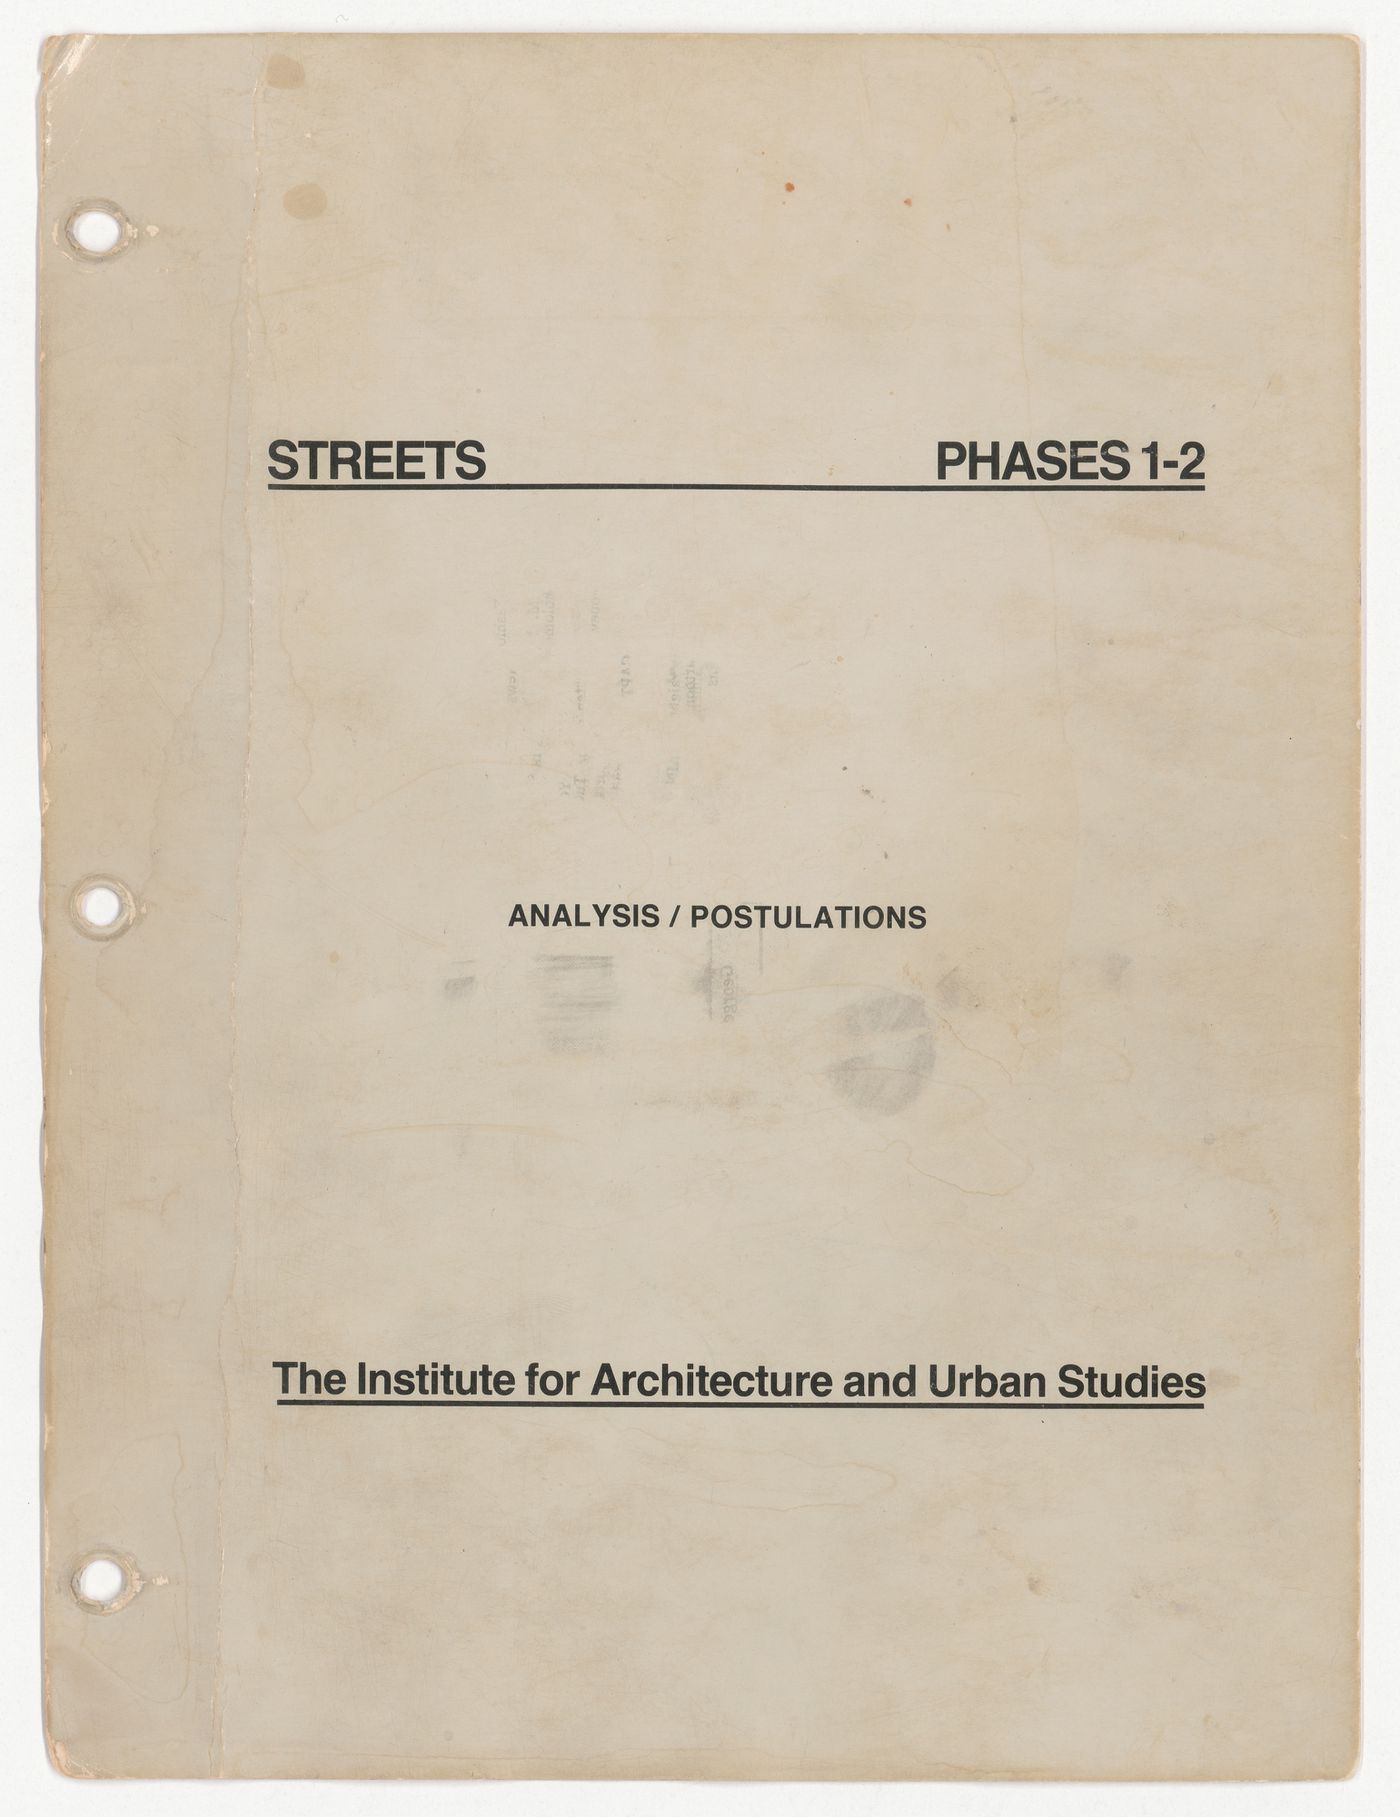 Analysis and postulations for IAUS Streets project phases1 and 2